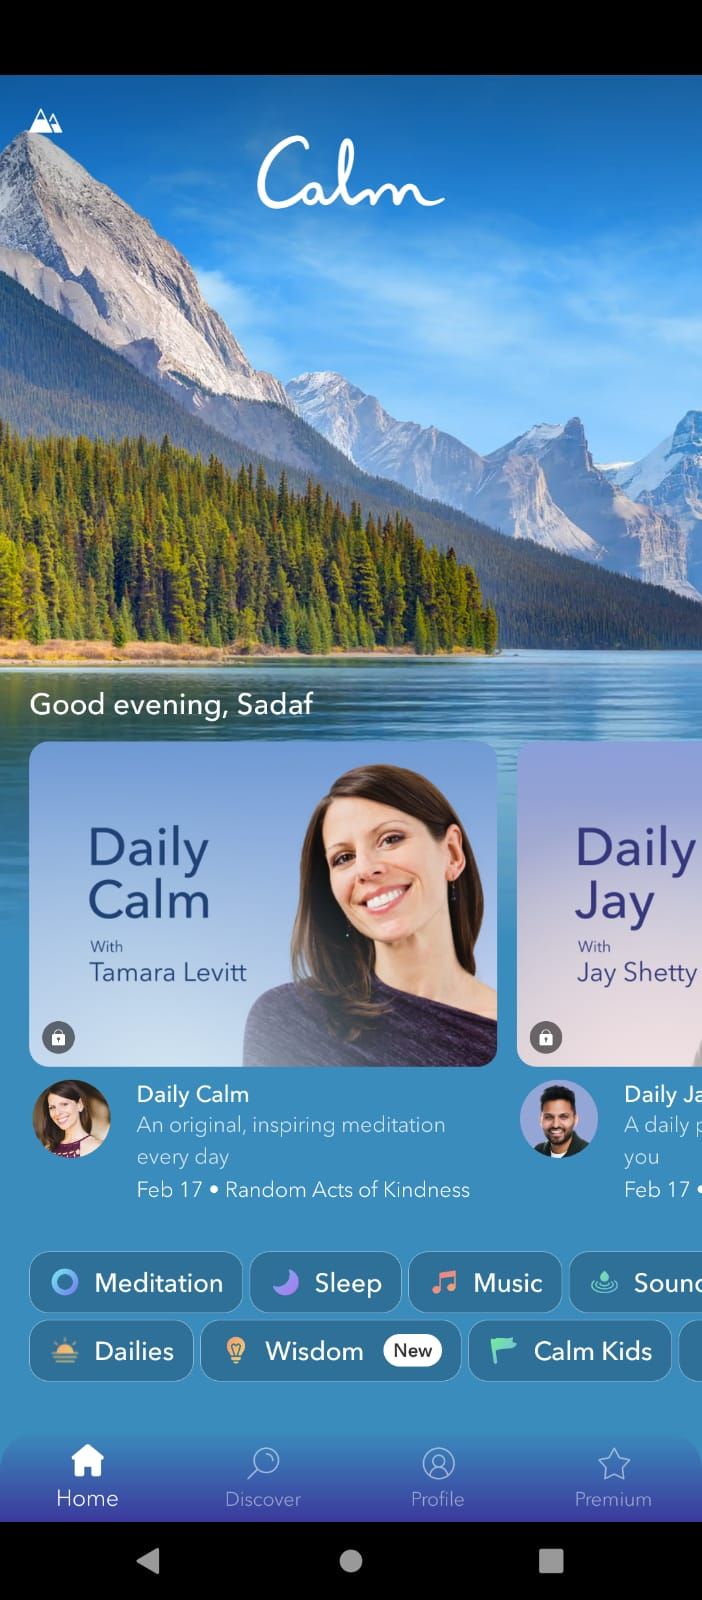 Homepage of the meditation app Calm